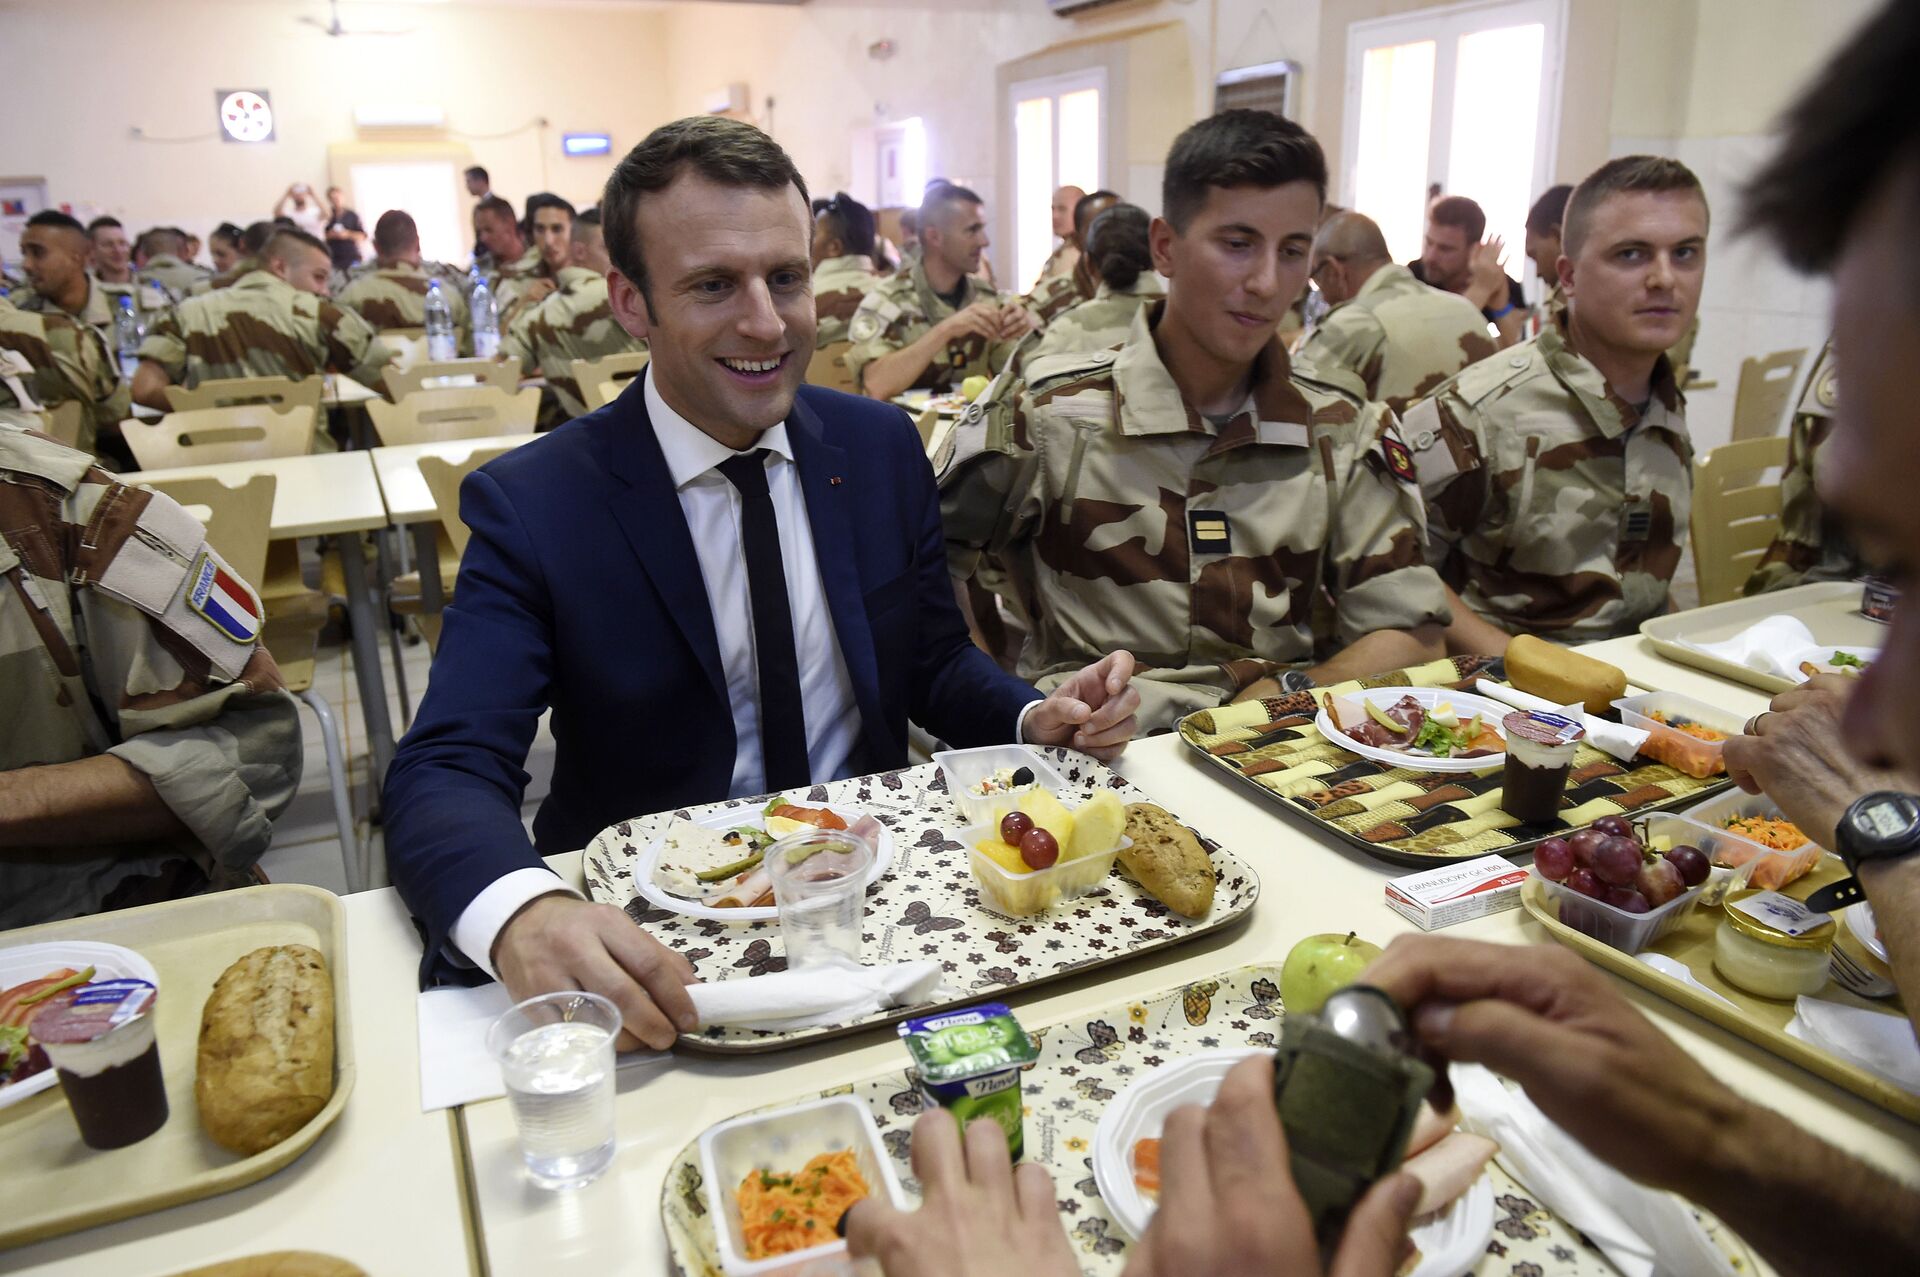 French President Emmanuel Macron (C) has a lunch break with French troops during his visit to France's Barkhane counter-terrorism operation in Africa's Sahel region in Gao, northern Mali, on May 19, 2017.  - Sputnik International, 1920, 09.11.2022